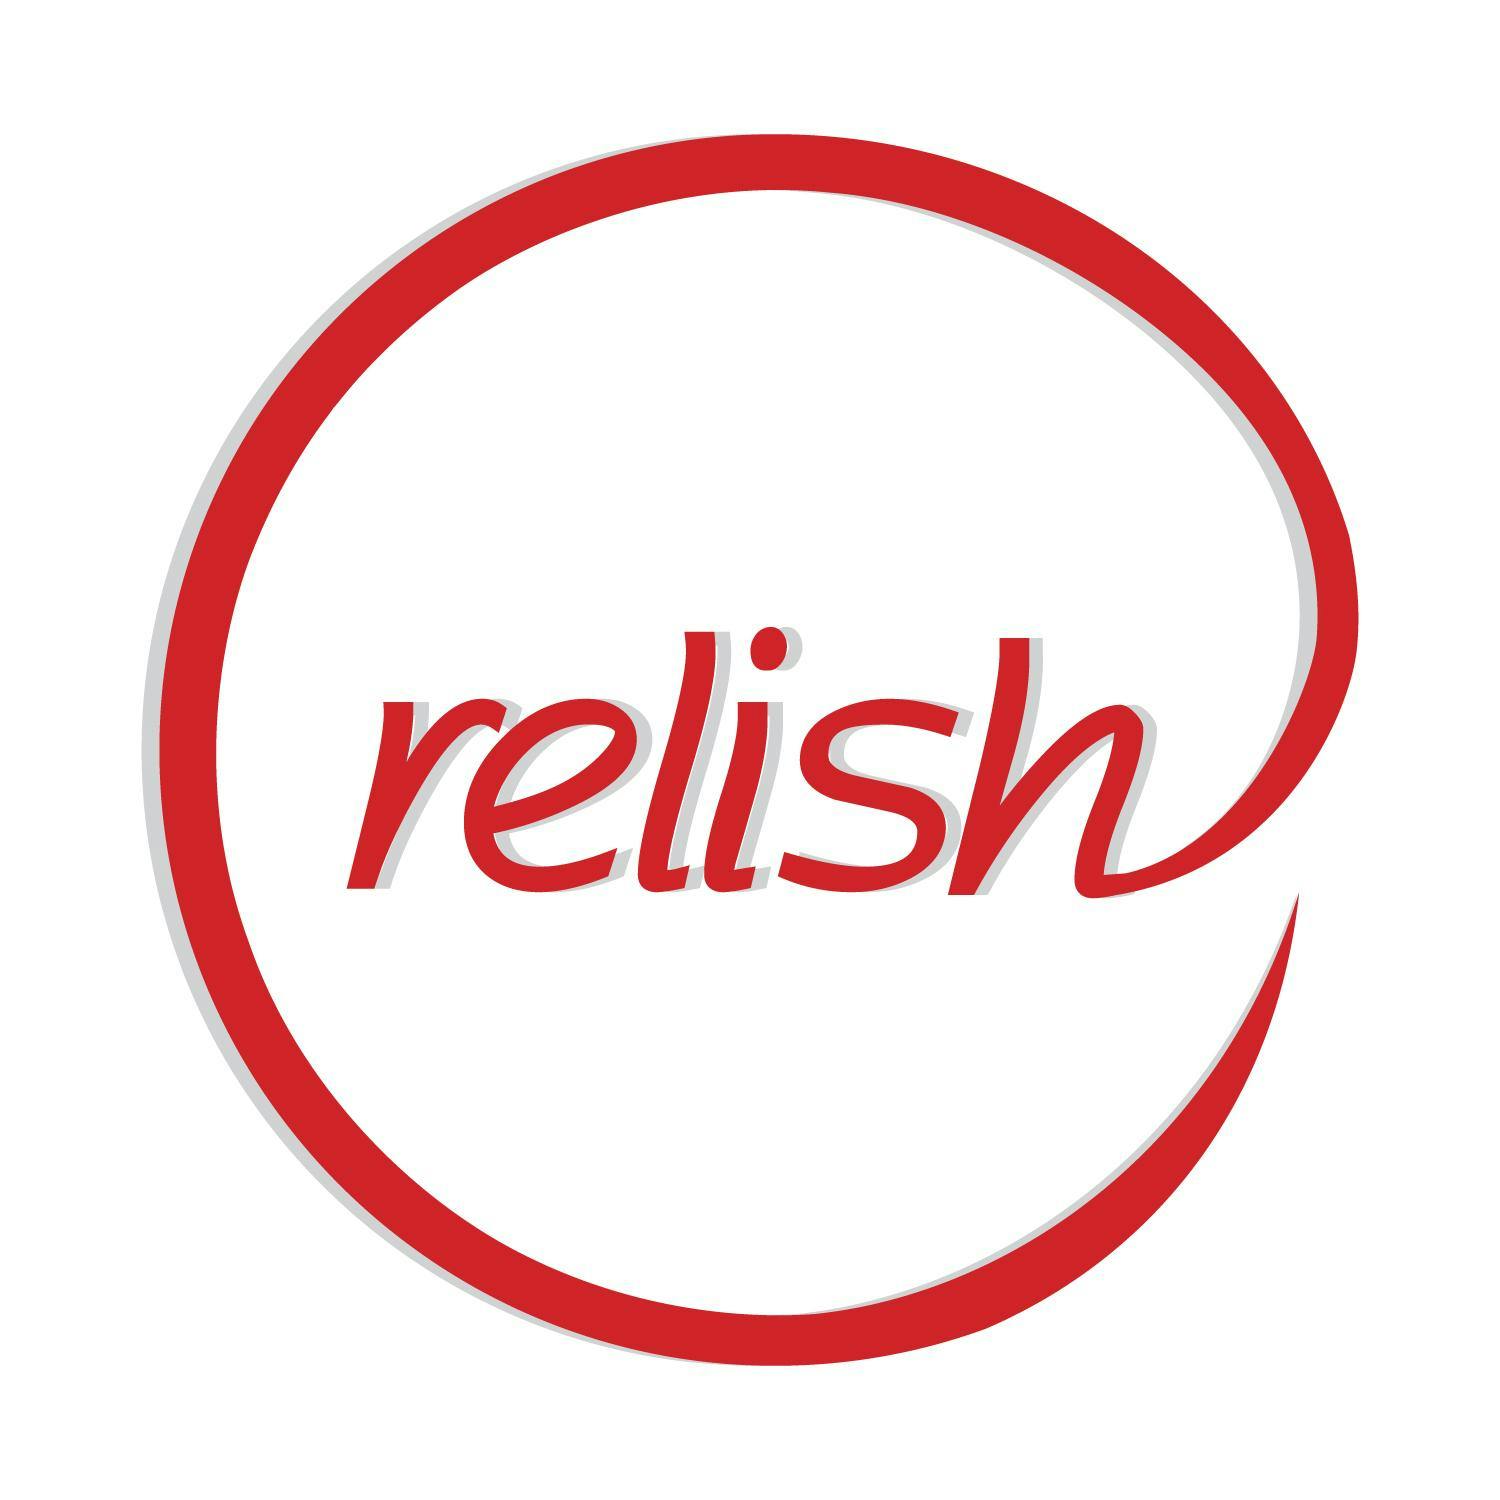 Do You Relish? | Singles Night Event| Relish Speed Dating Minneapolis